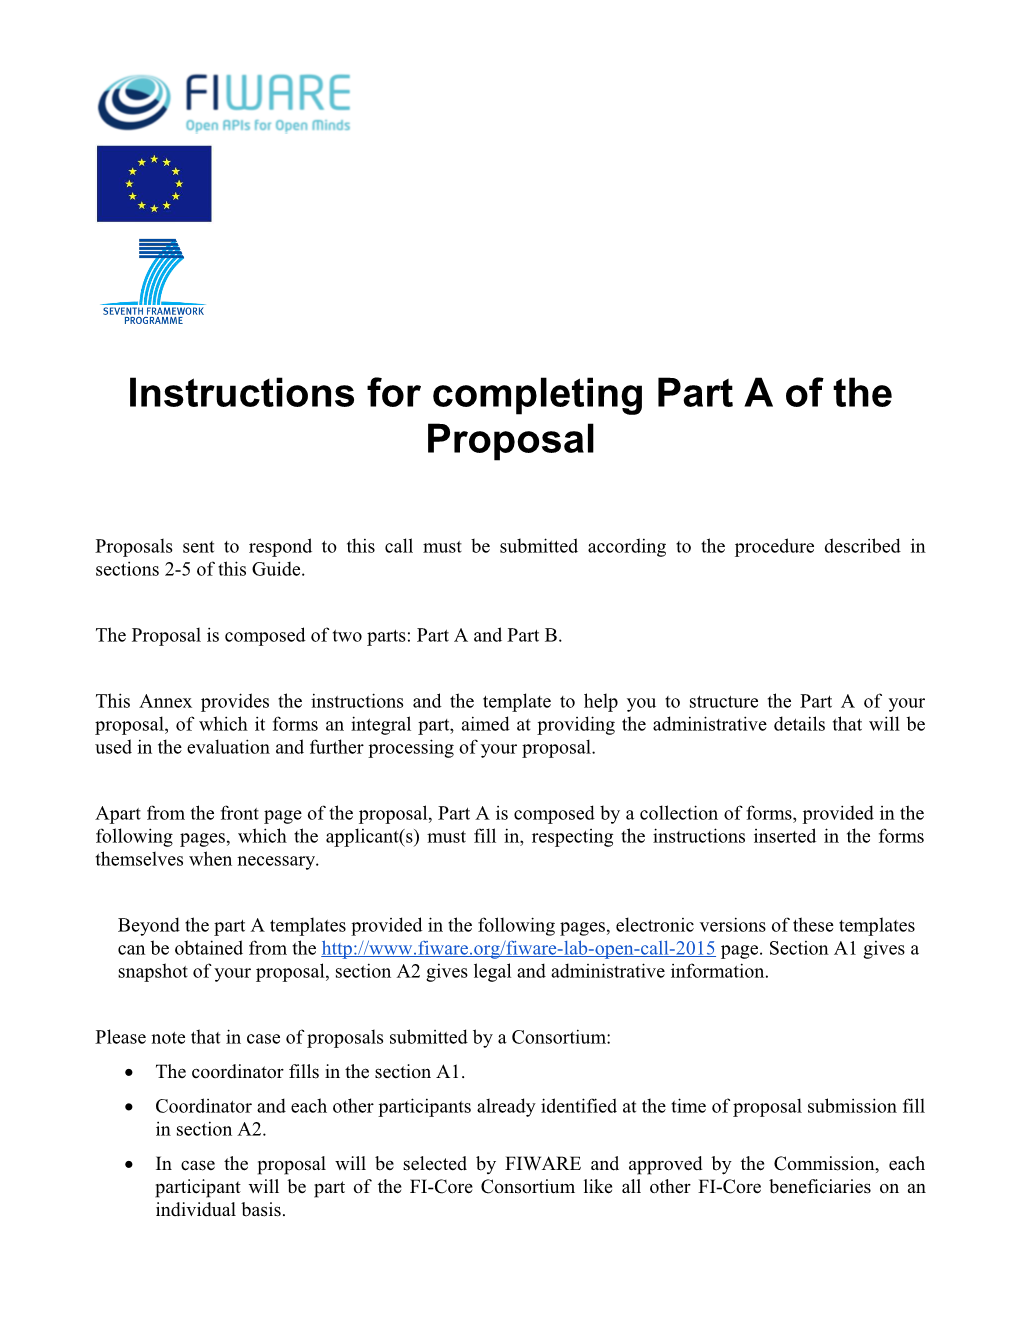 Instructions for Completing Part a of the Proposal